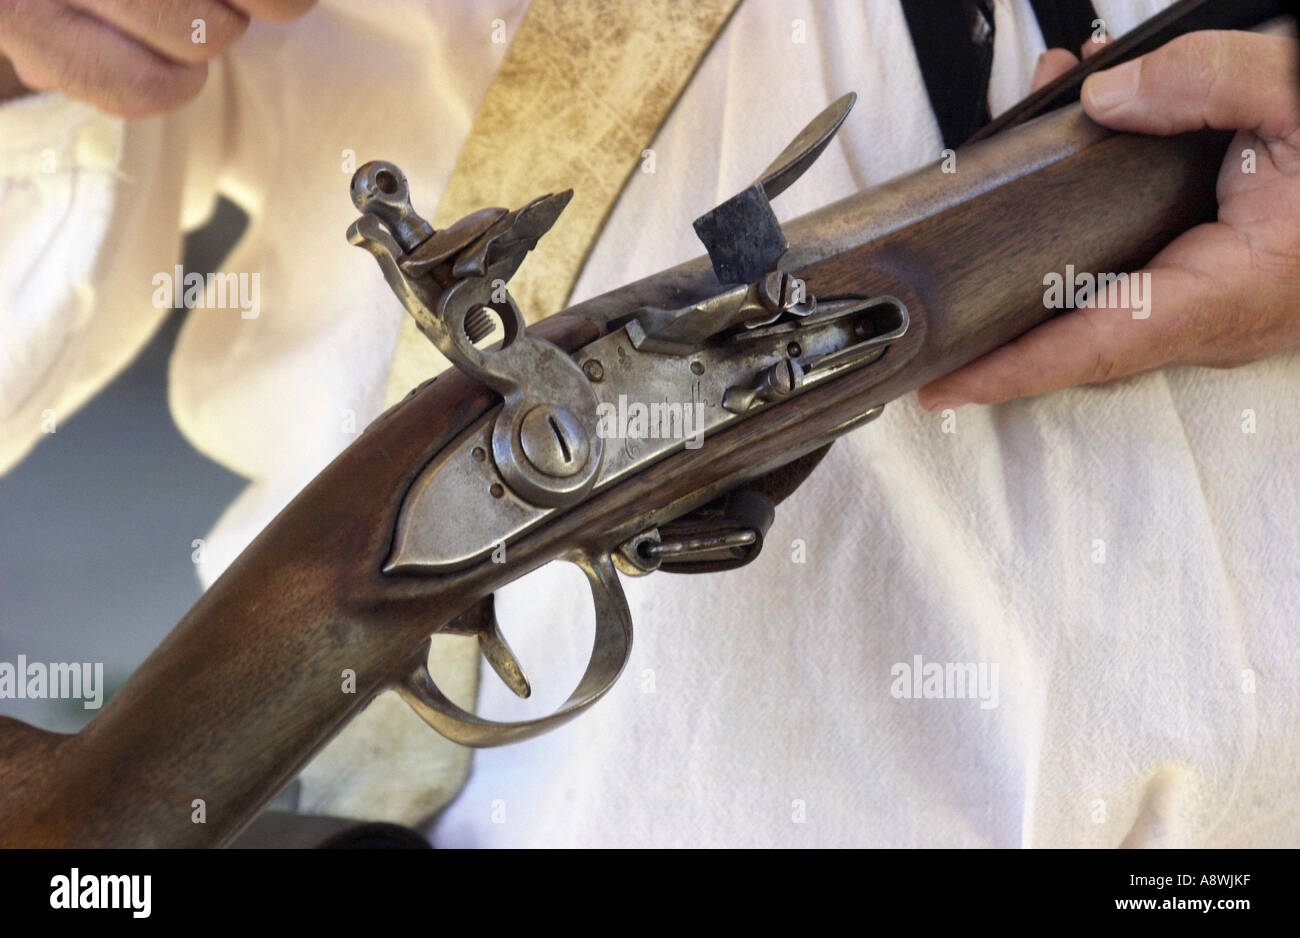 Flintlock musket demonstrated by a reenactor at Sutters Fort in Sacramento California. Digital photograph Stock Photo